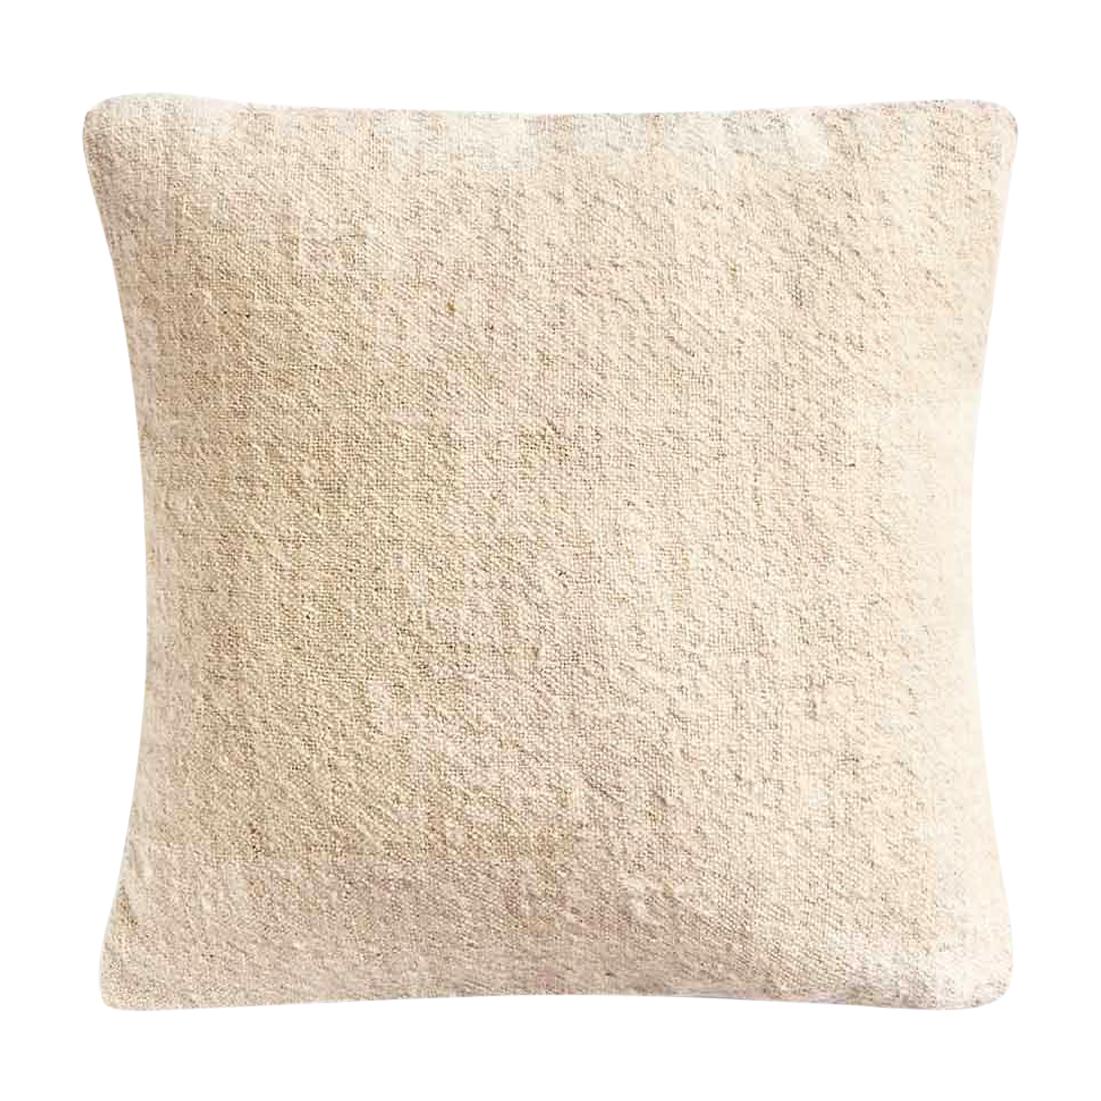 Off-White Cushion Cover, made of Handspun and Handwoven wool